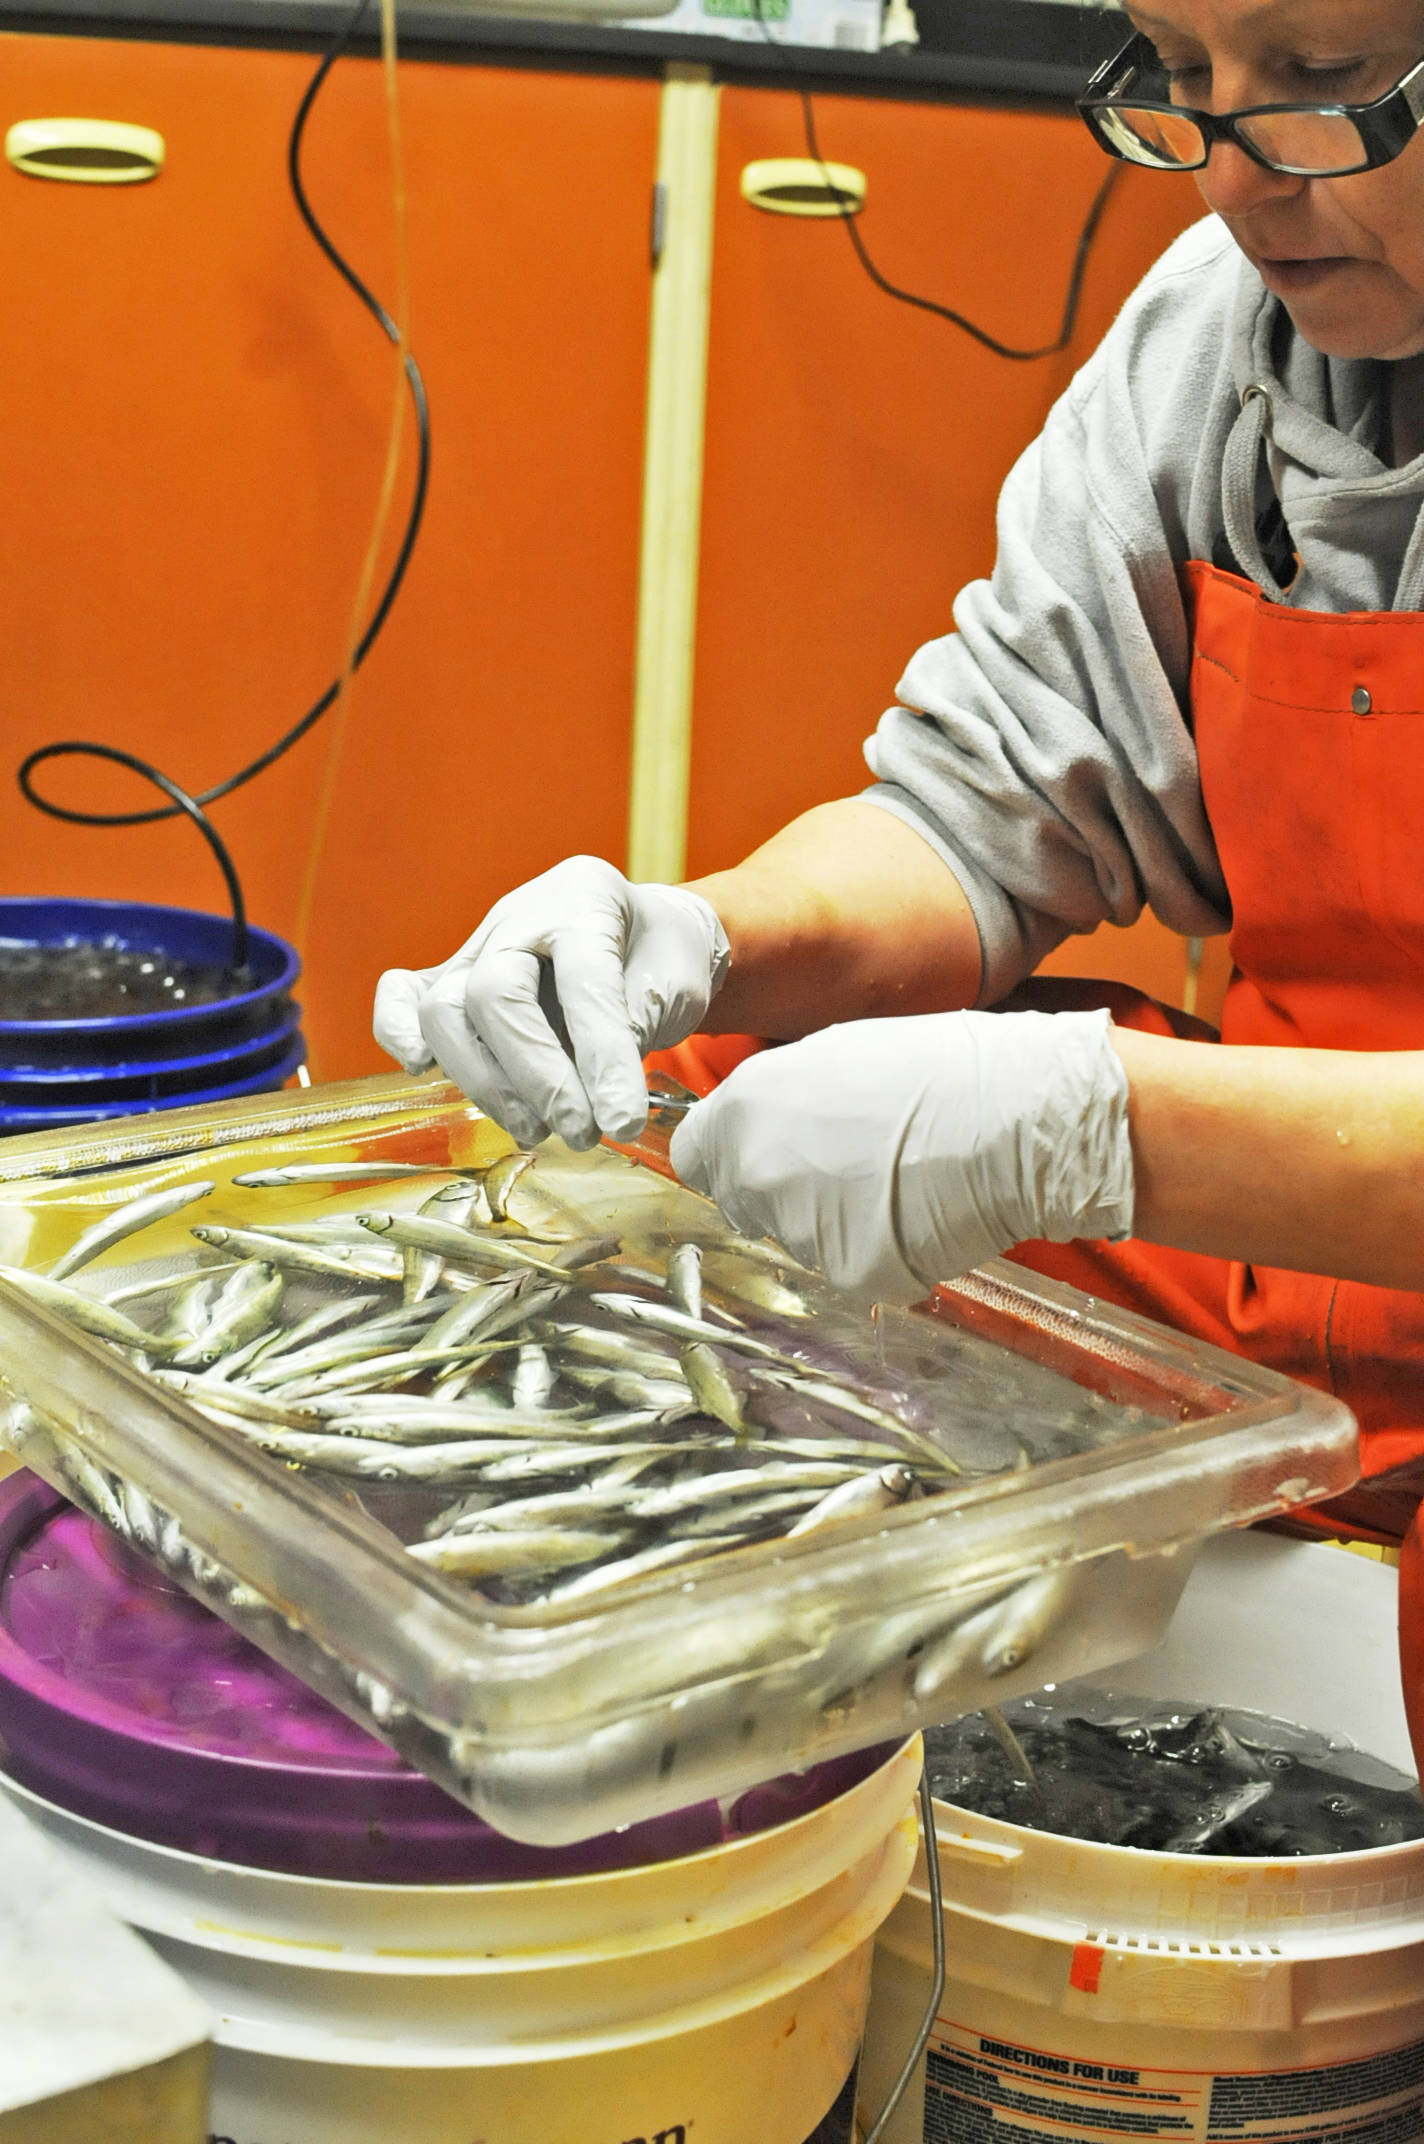 A worker at Cook Inlet Aquaculture Association’s Trail Lakes Hatchery trims the adipose fins off sockeye salmon smolt destined for Shell lake in the Matanuska-Susitna Valley on Friday, April 20, 2018 near Moose Pass, Alaska. Pacific salmon raised in hatcheries are usually exposed to predetermined sets of hot and cold water cycles before they hatch, leading to dark and light rings on their inner ear bone, called an otolith, that biologists can later read to track where the salmon came from when it returns as an adult. Staff at Trail Lakes Hatchery raise all the association’s sockeye salmon, which are hatched, imprinted and distributed to the organization’s various operations across Cook Inlet, from China Poot Lake in Lower Cook Inlet to Shell Lake. (Photo by Elizabeth Earl/Peninsula Clarion)